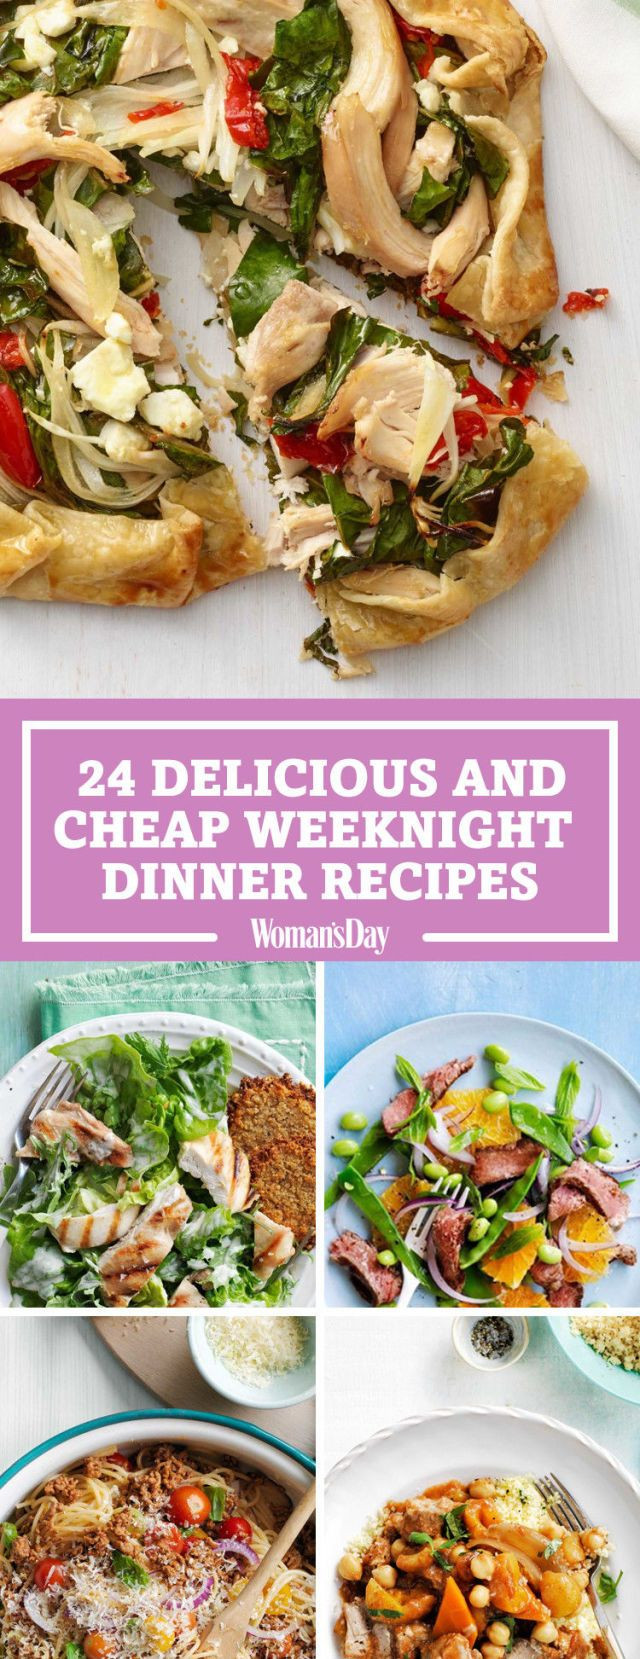 Easy Cheap Dinner Ideas
 100 Cheap Dinner Ideas – Easy Recipes for Inexpensive Meals